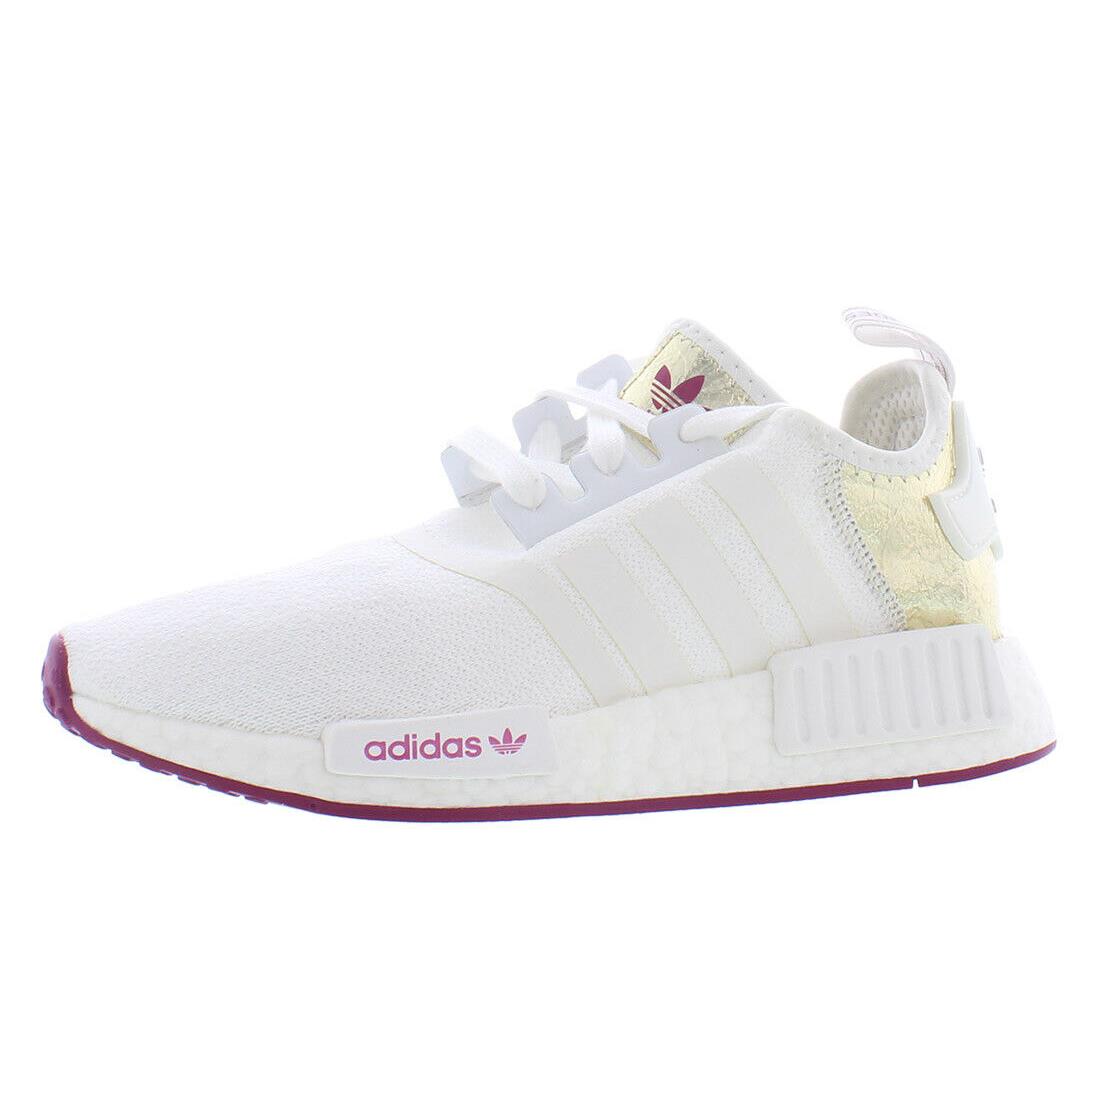 Adidas Nmd R1 Womens Shoes - White/Berry/Gold, Main: White